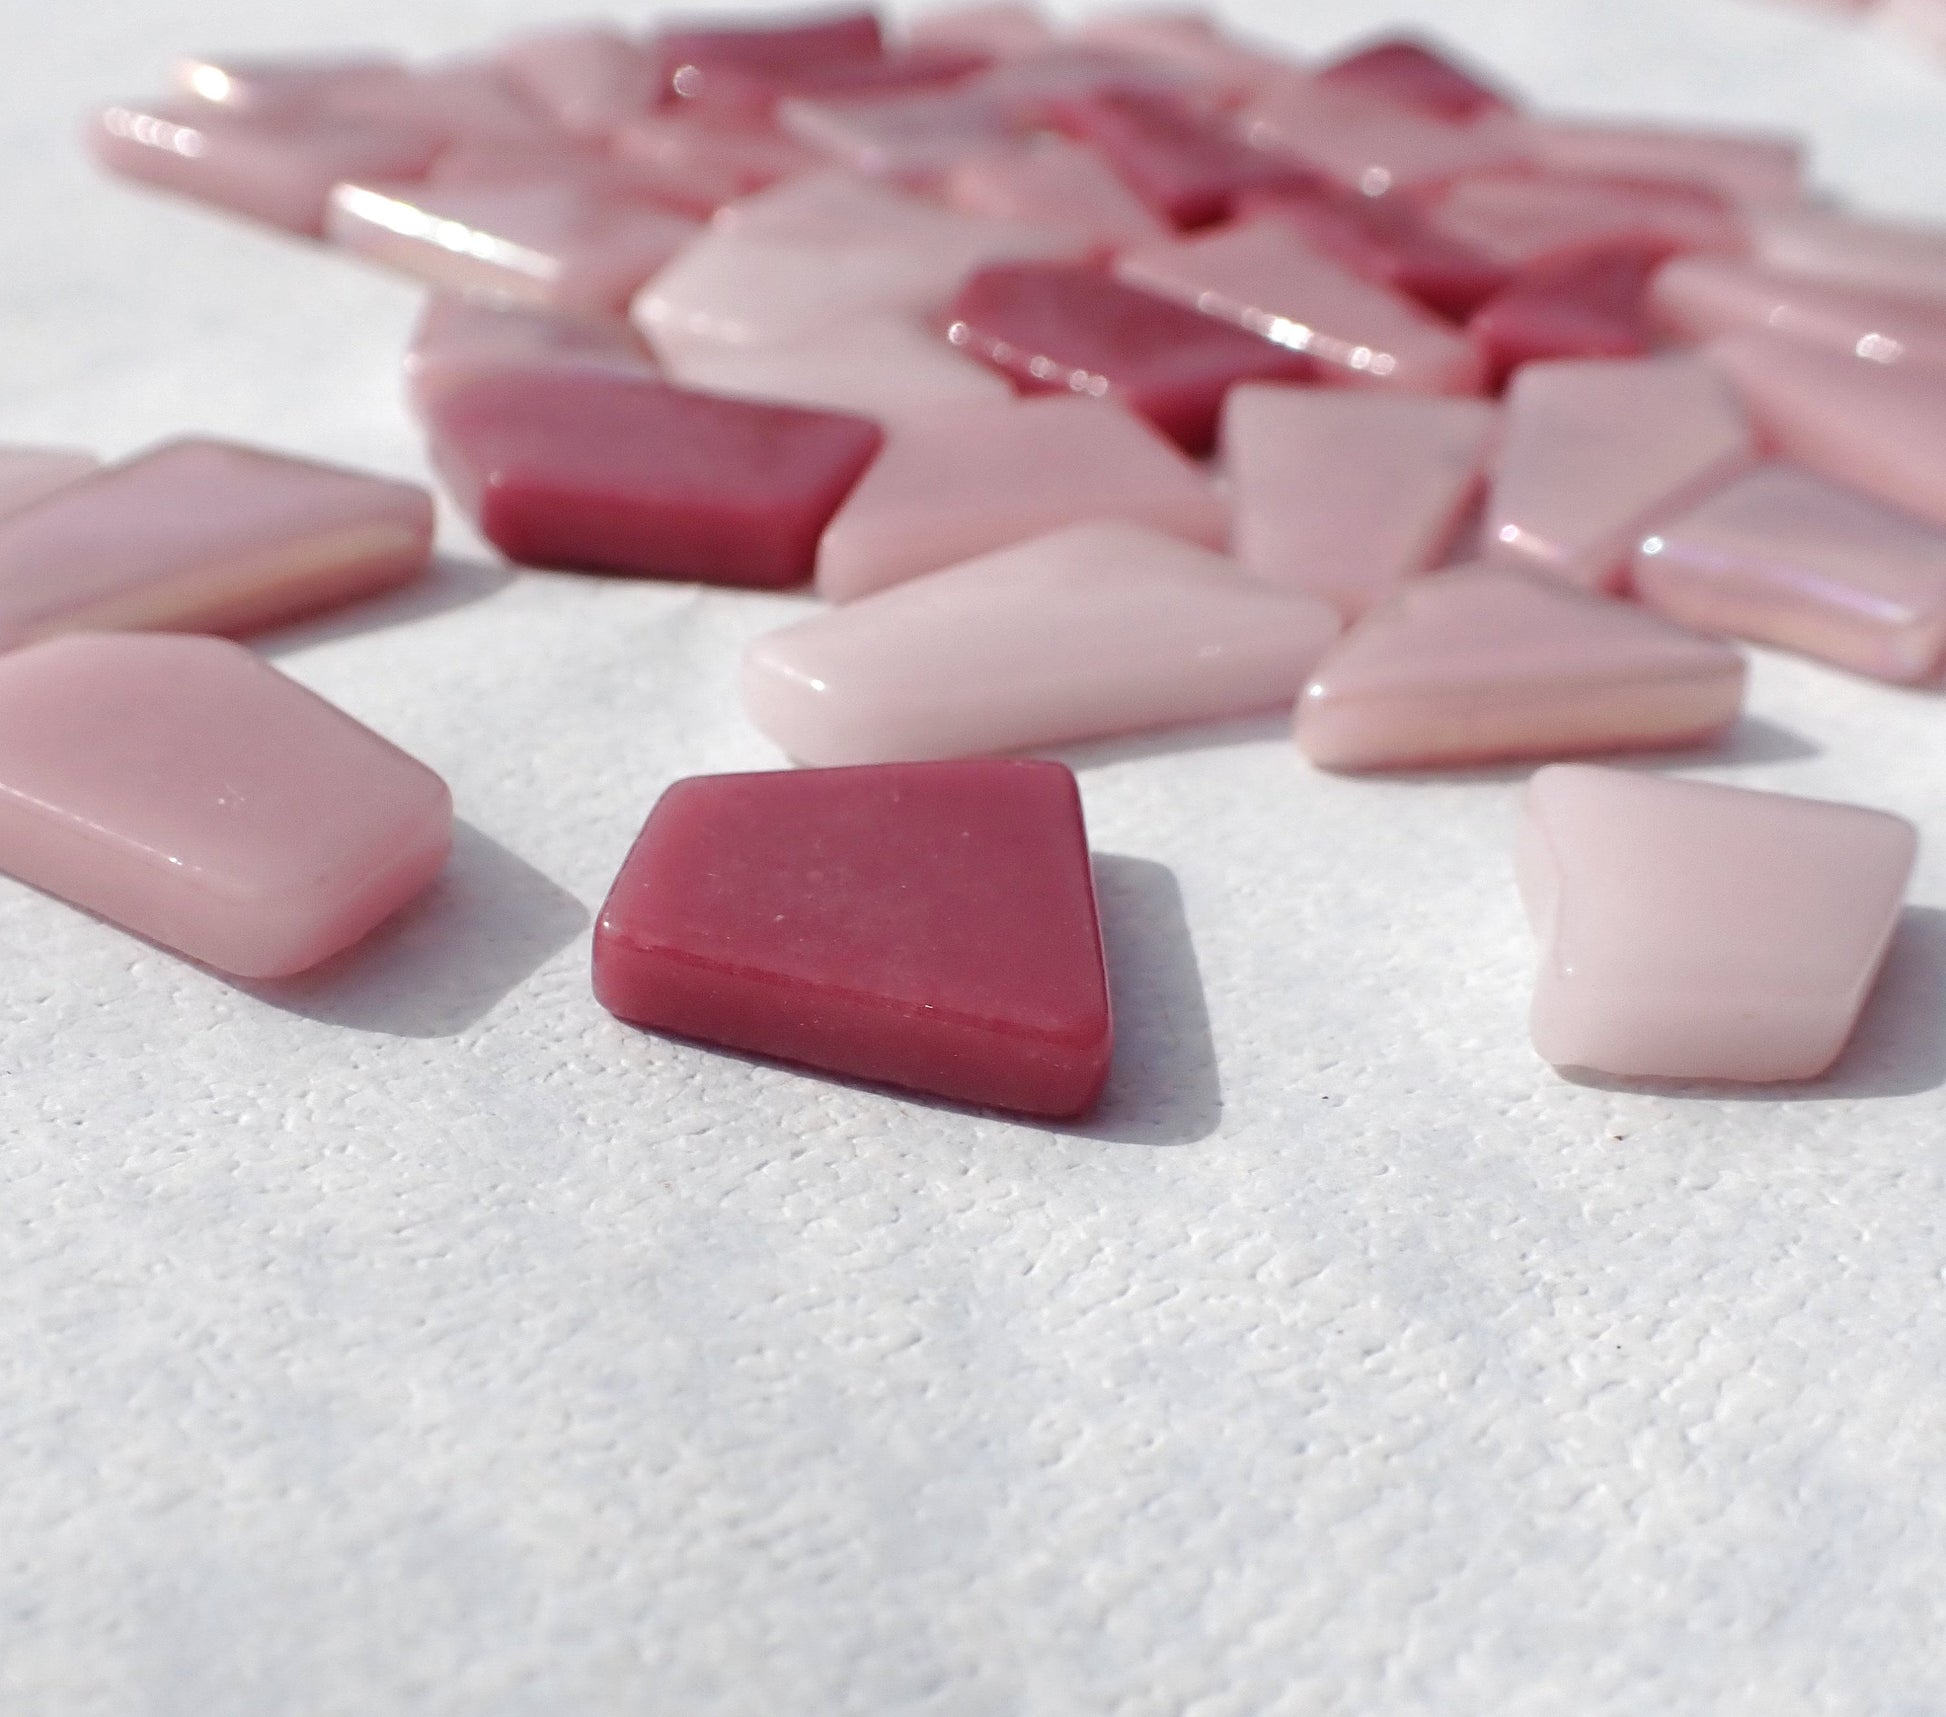 Plenty of Pink Irregular Glass Tiles - 50g of Polygons in Mix of Sizes - Dreamdrift